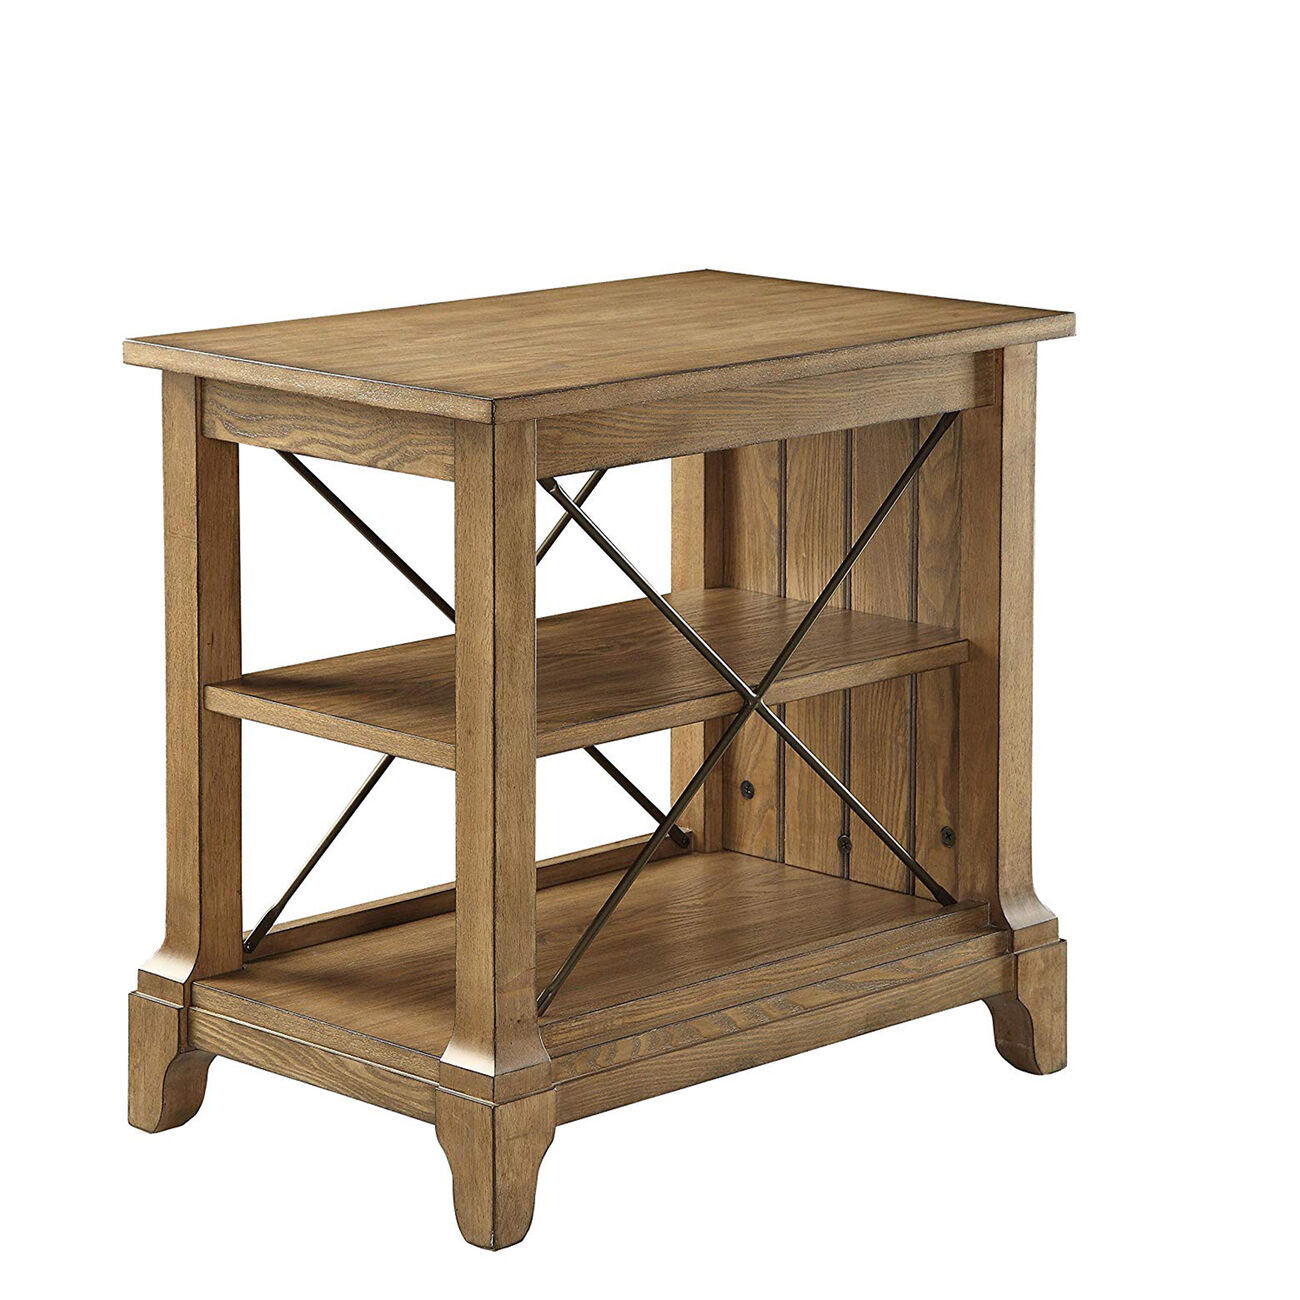 Wooden Side Table With 2 Compartments, Oak Brown